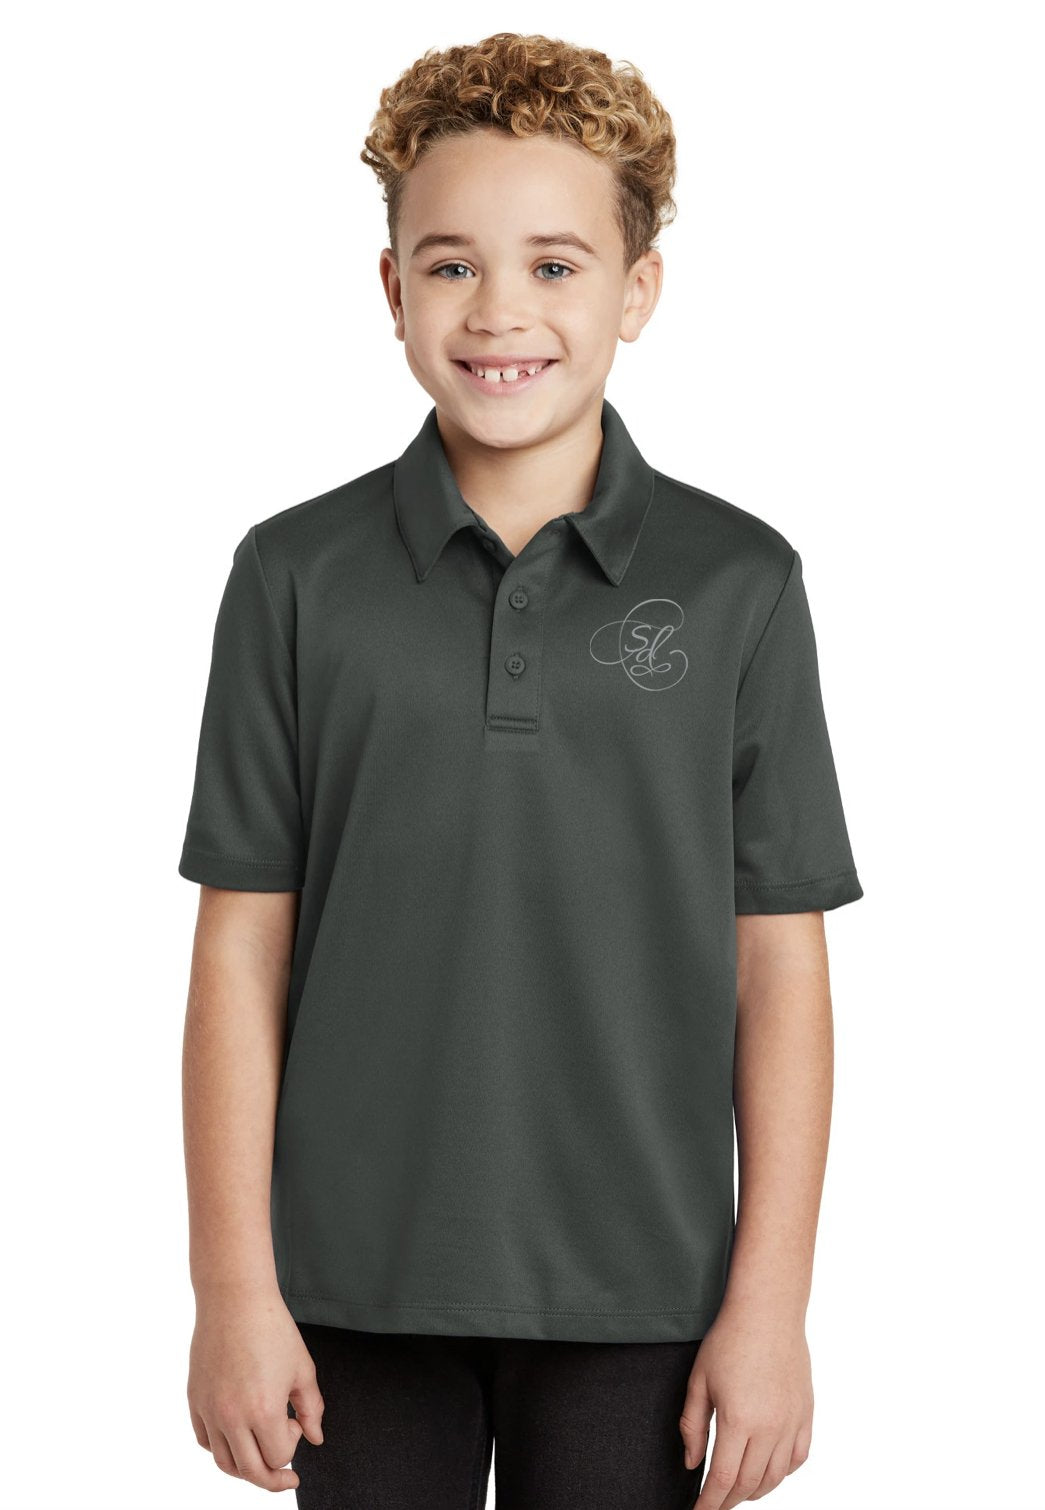 Synchrony Dressage Riding School Youth Port Authority® Silk Touch™ Polo